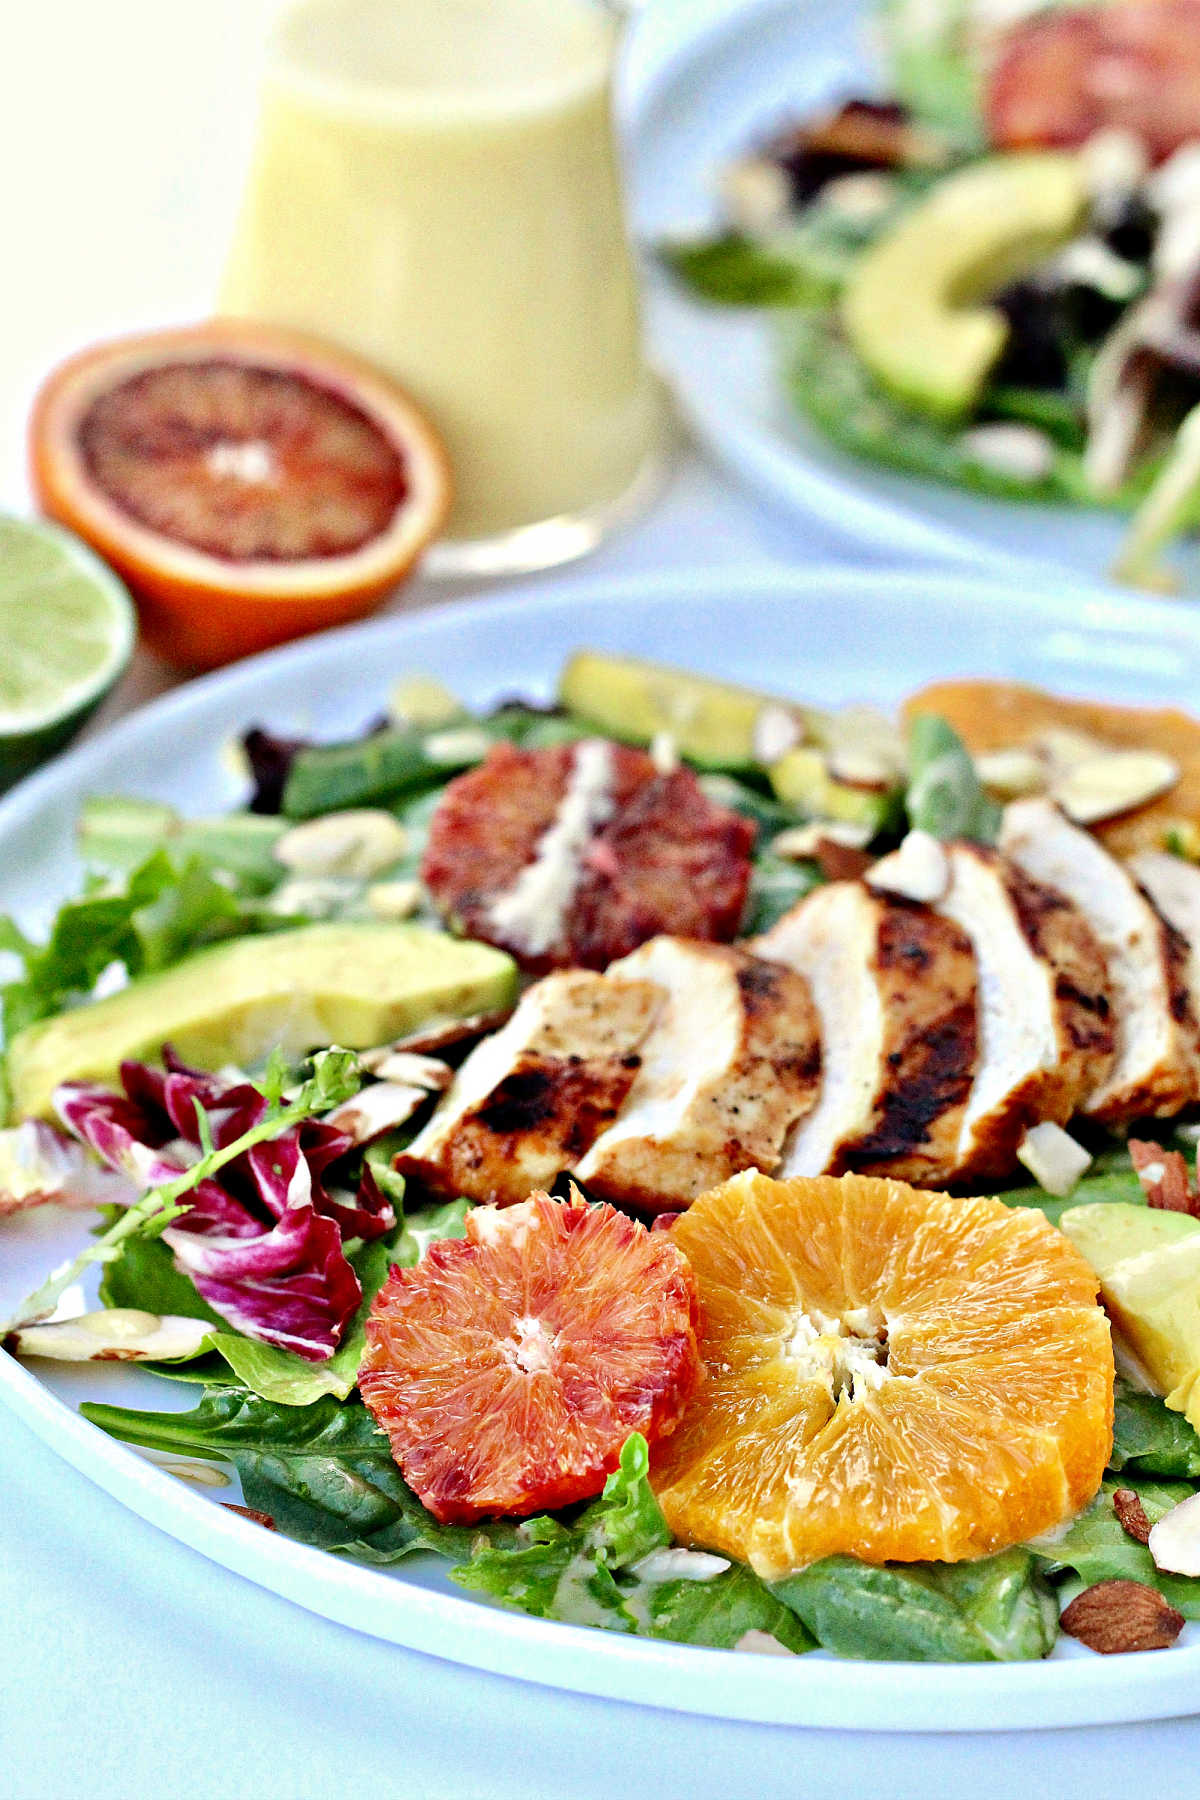 Summer citrus salad with grilled chicken on a white plate.